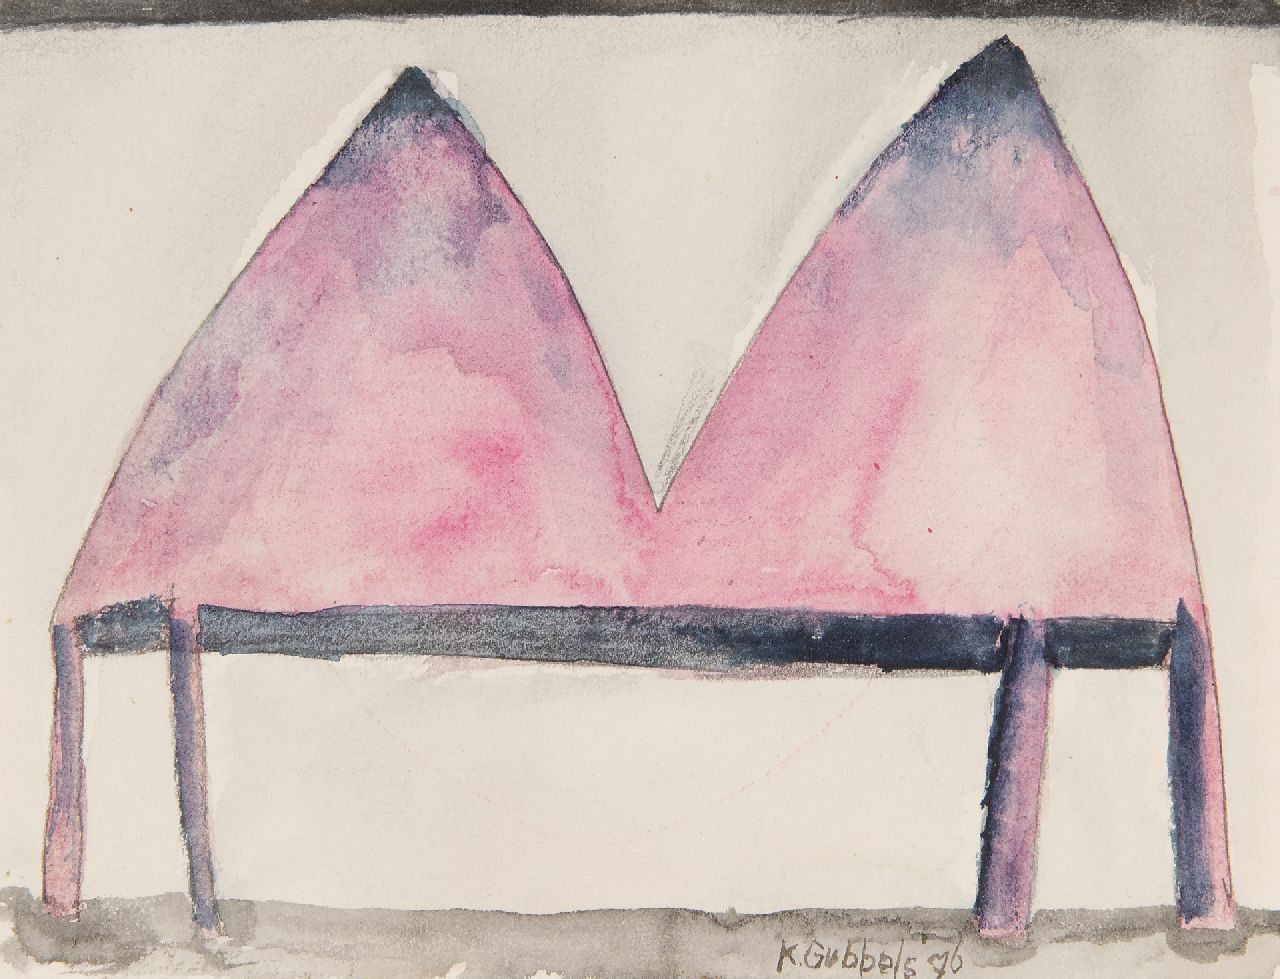 Klaas Gubbels | Table, crayon and watercolour on paper, 12.5 x 16.2 cm, signed l.r. and dated '76